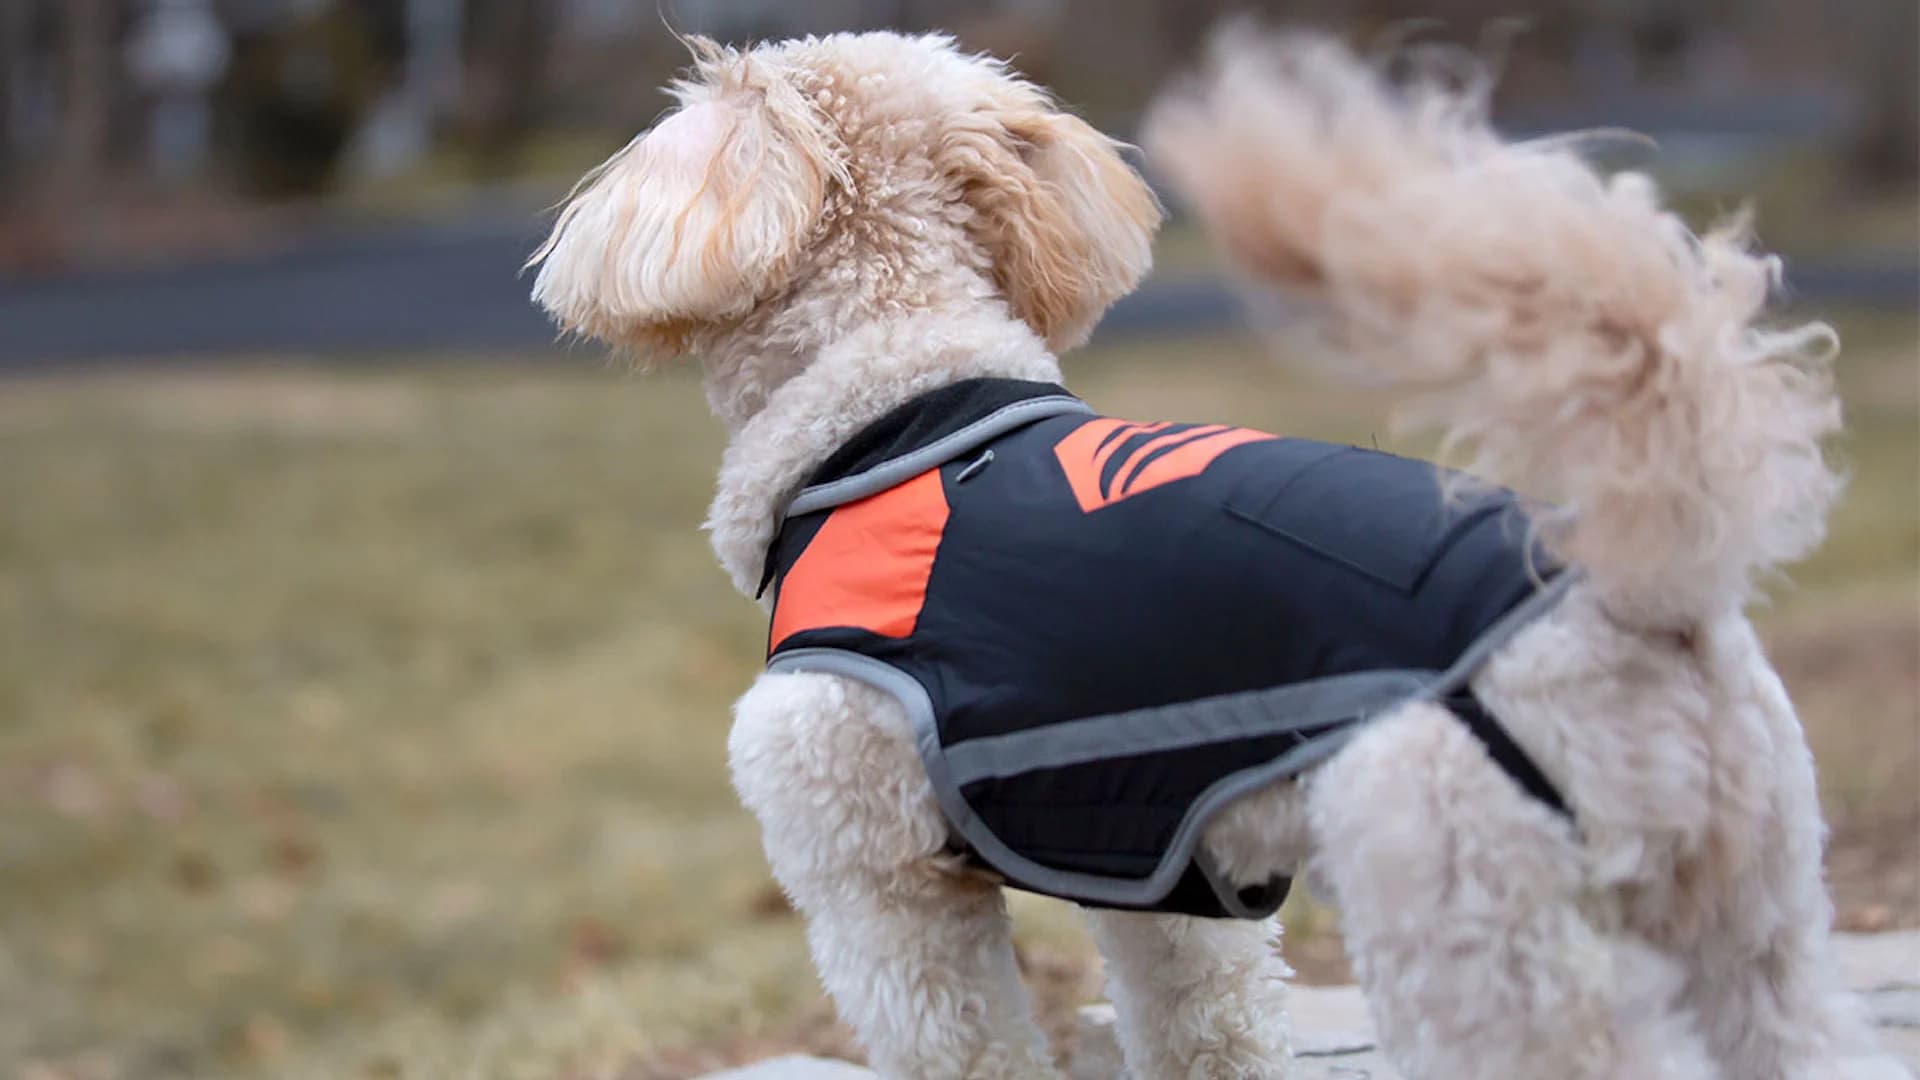 Keep your dog warm and toasty in the cold with this heated vest for $31